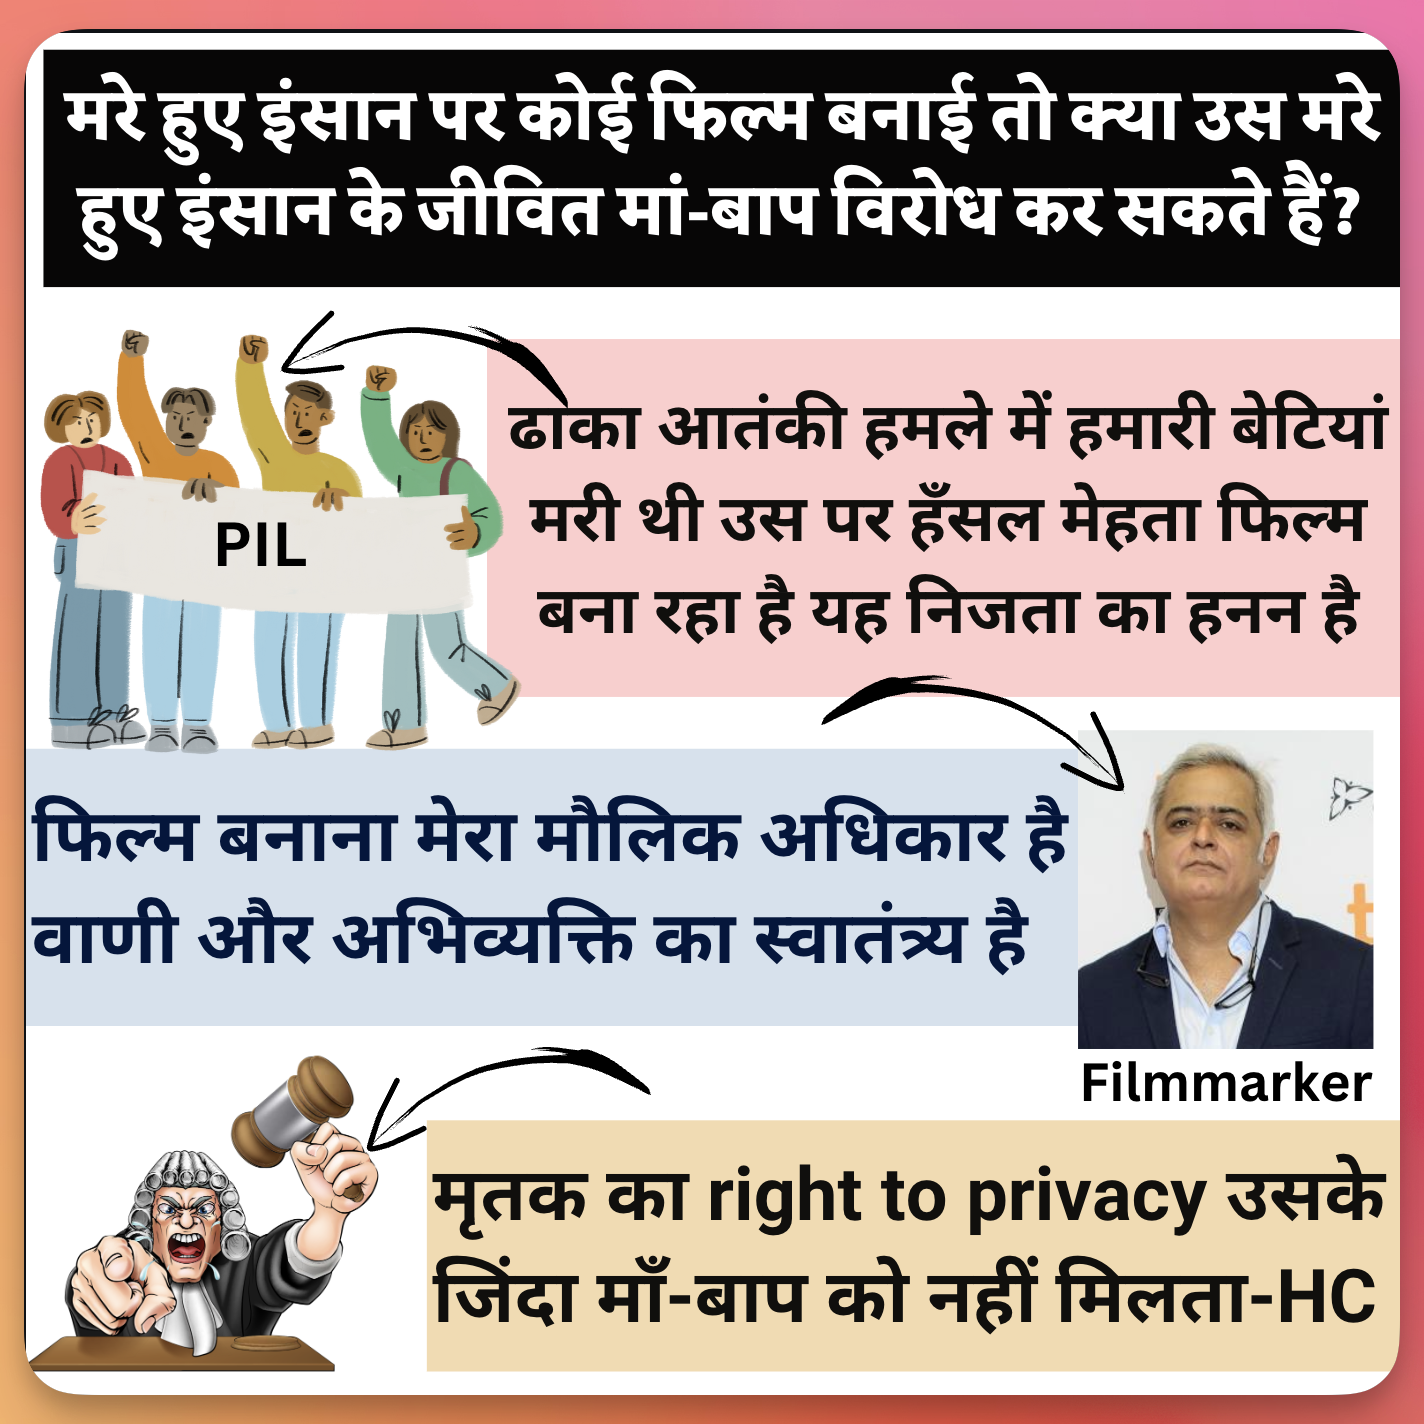 Rights issues: Dead person’s right to privacy vs filmmaker’s freedom of expression and profession: Hansal Mehta's Faraaz